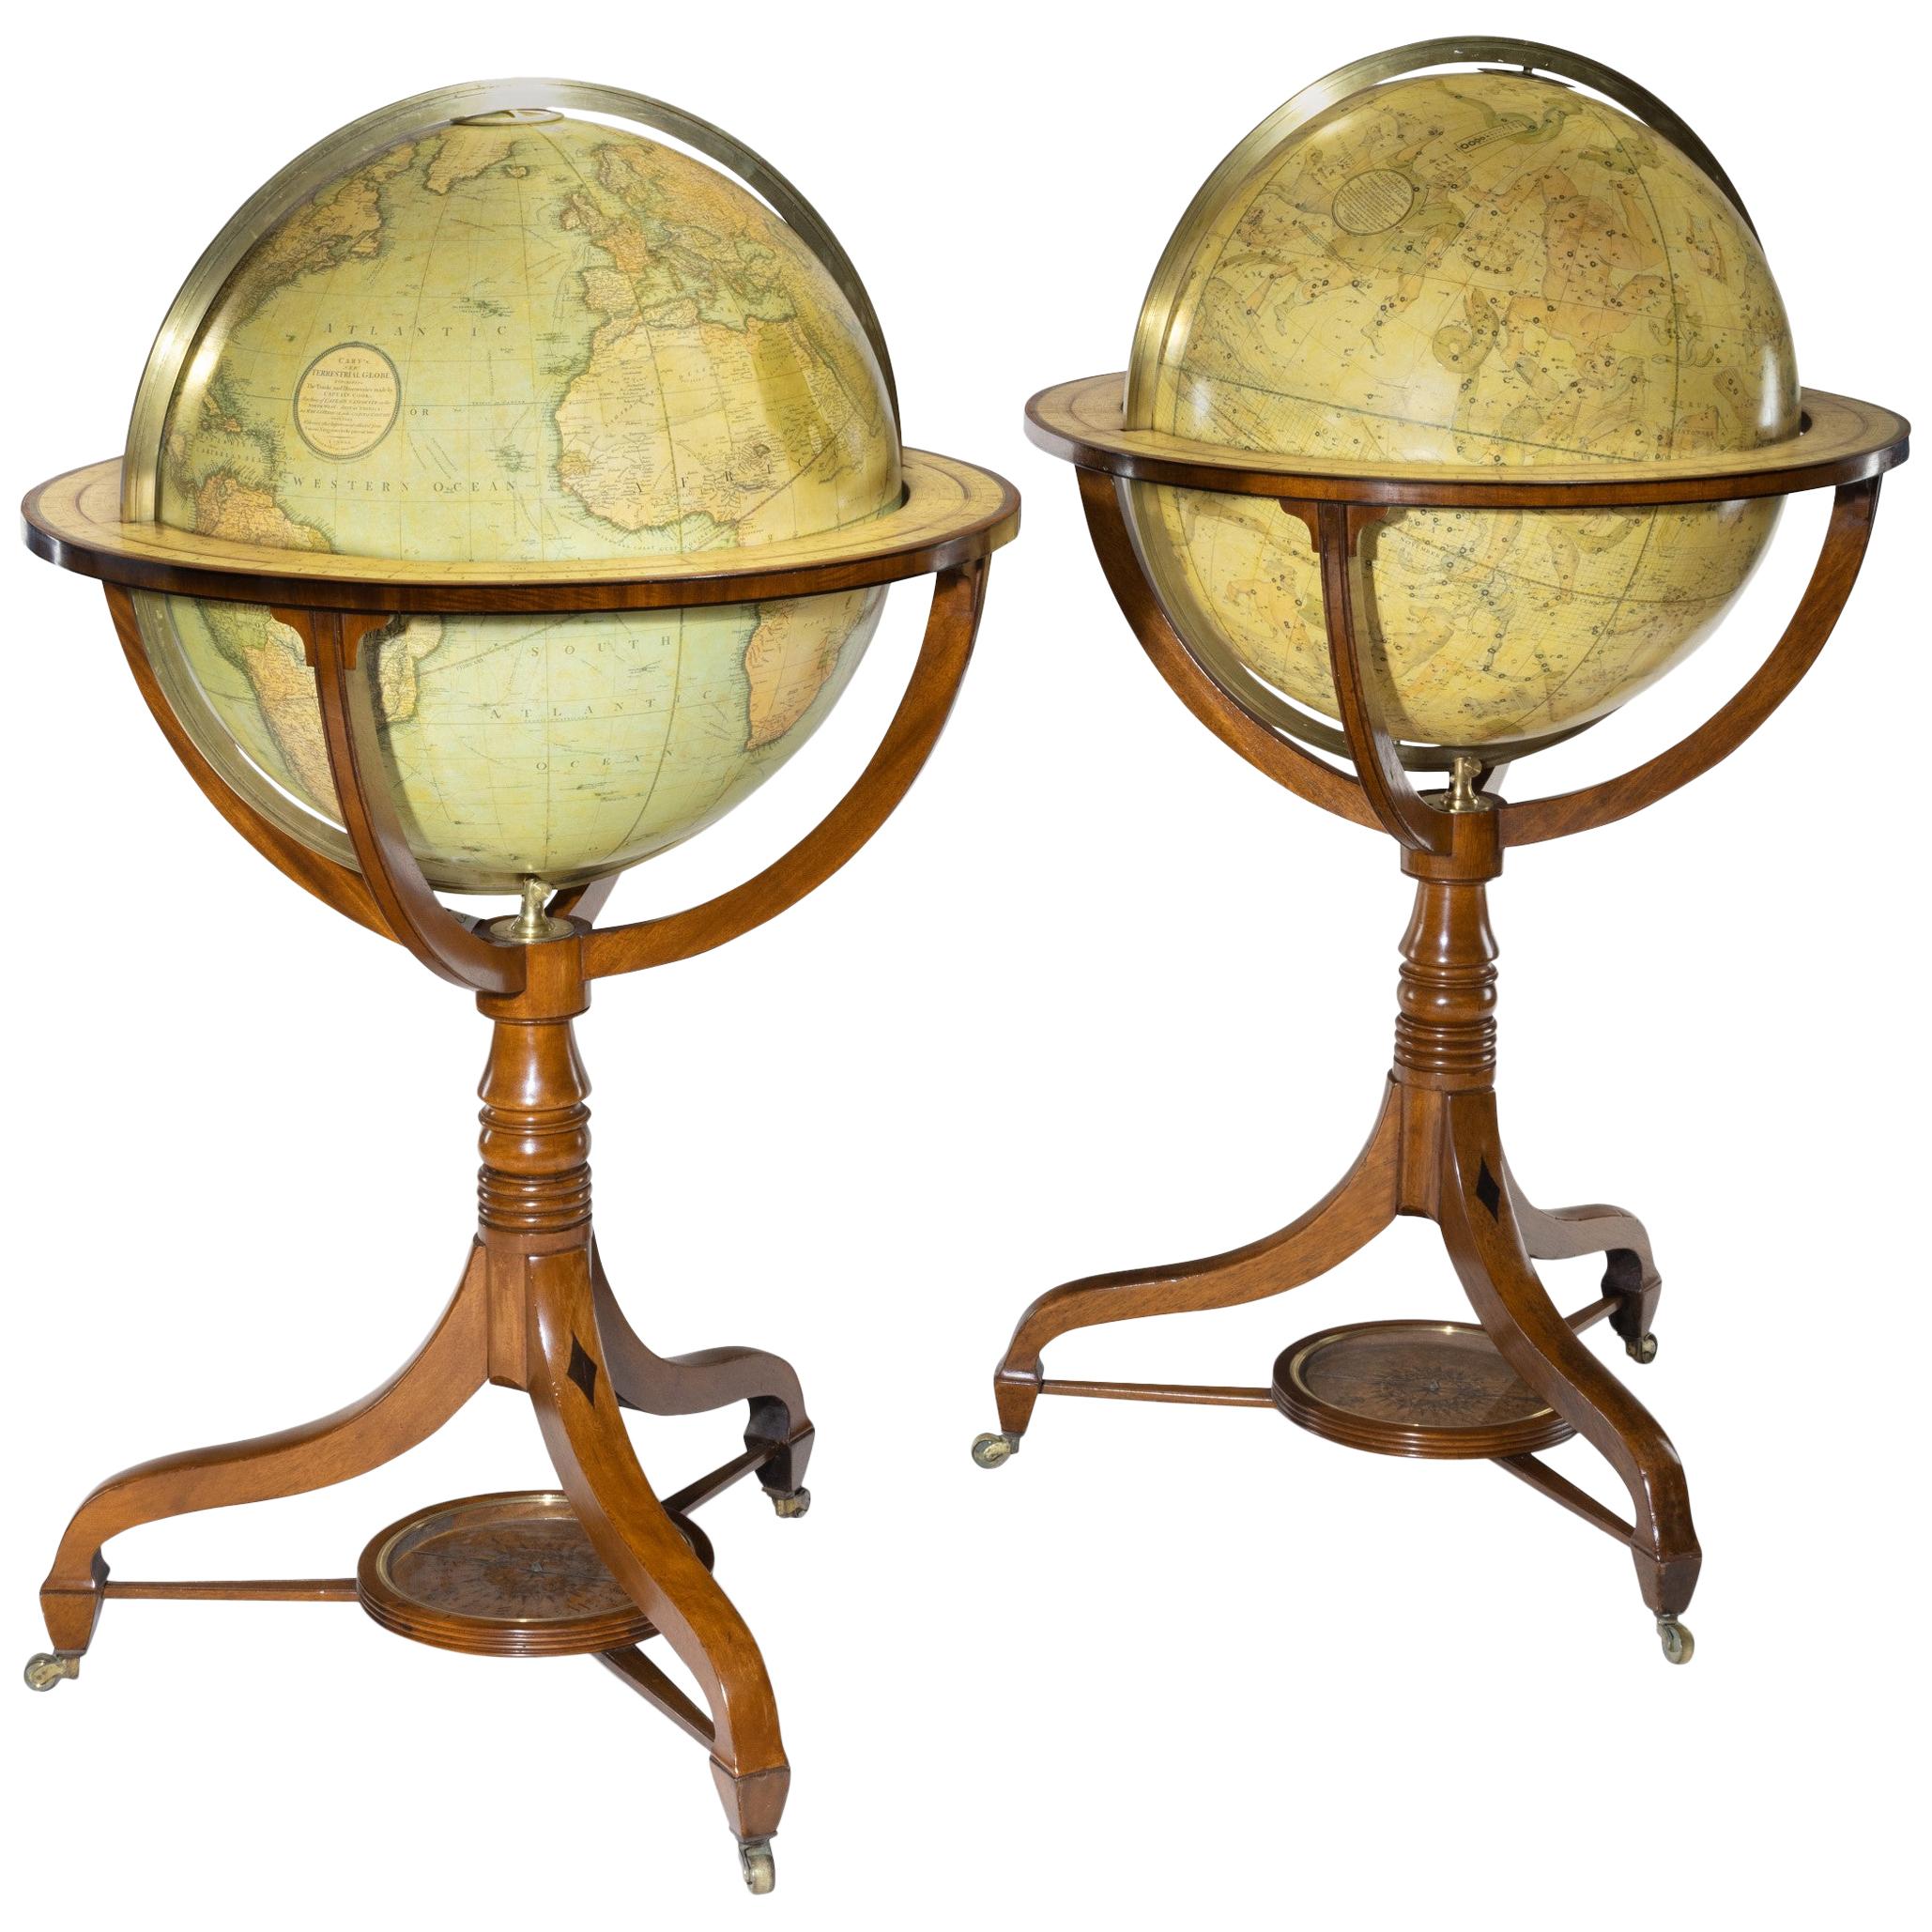 Pair of George III Globes by J&W Cary Dated 1815 and 1800